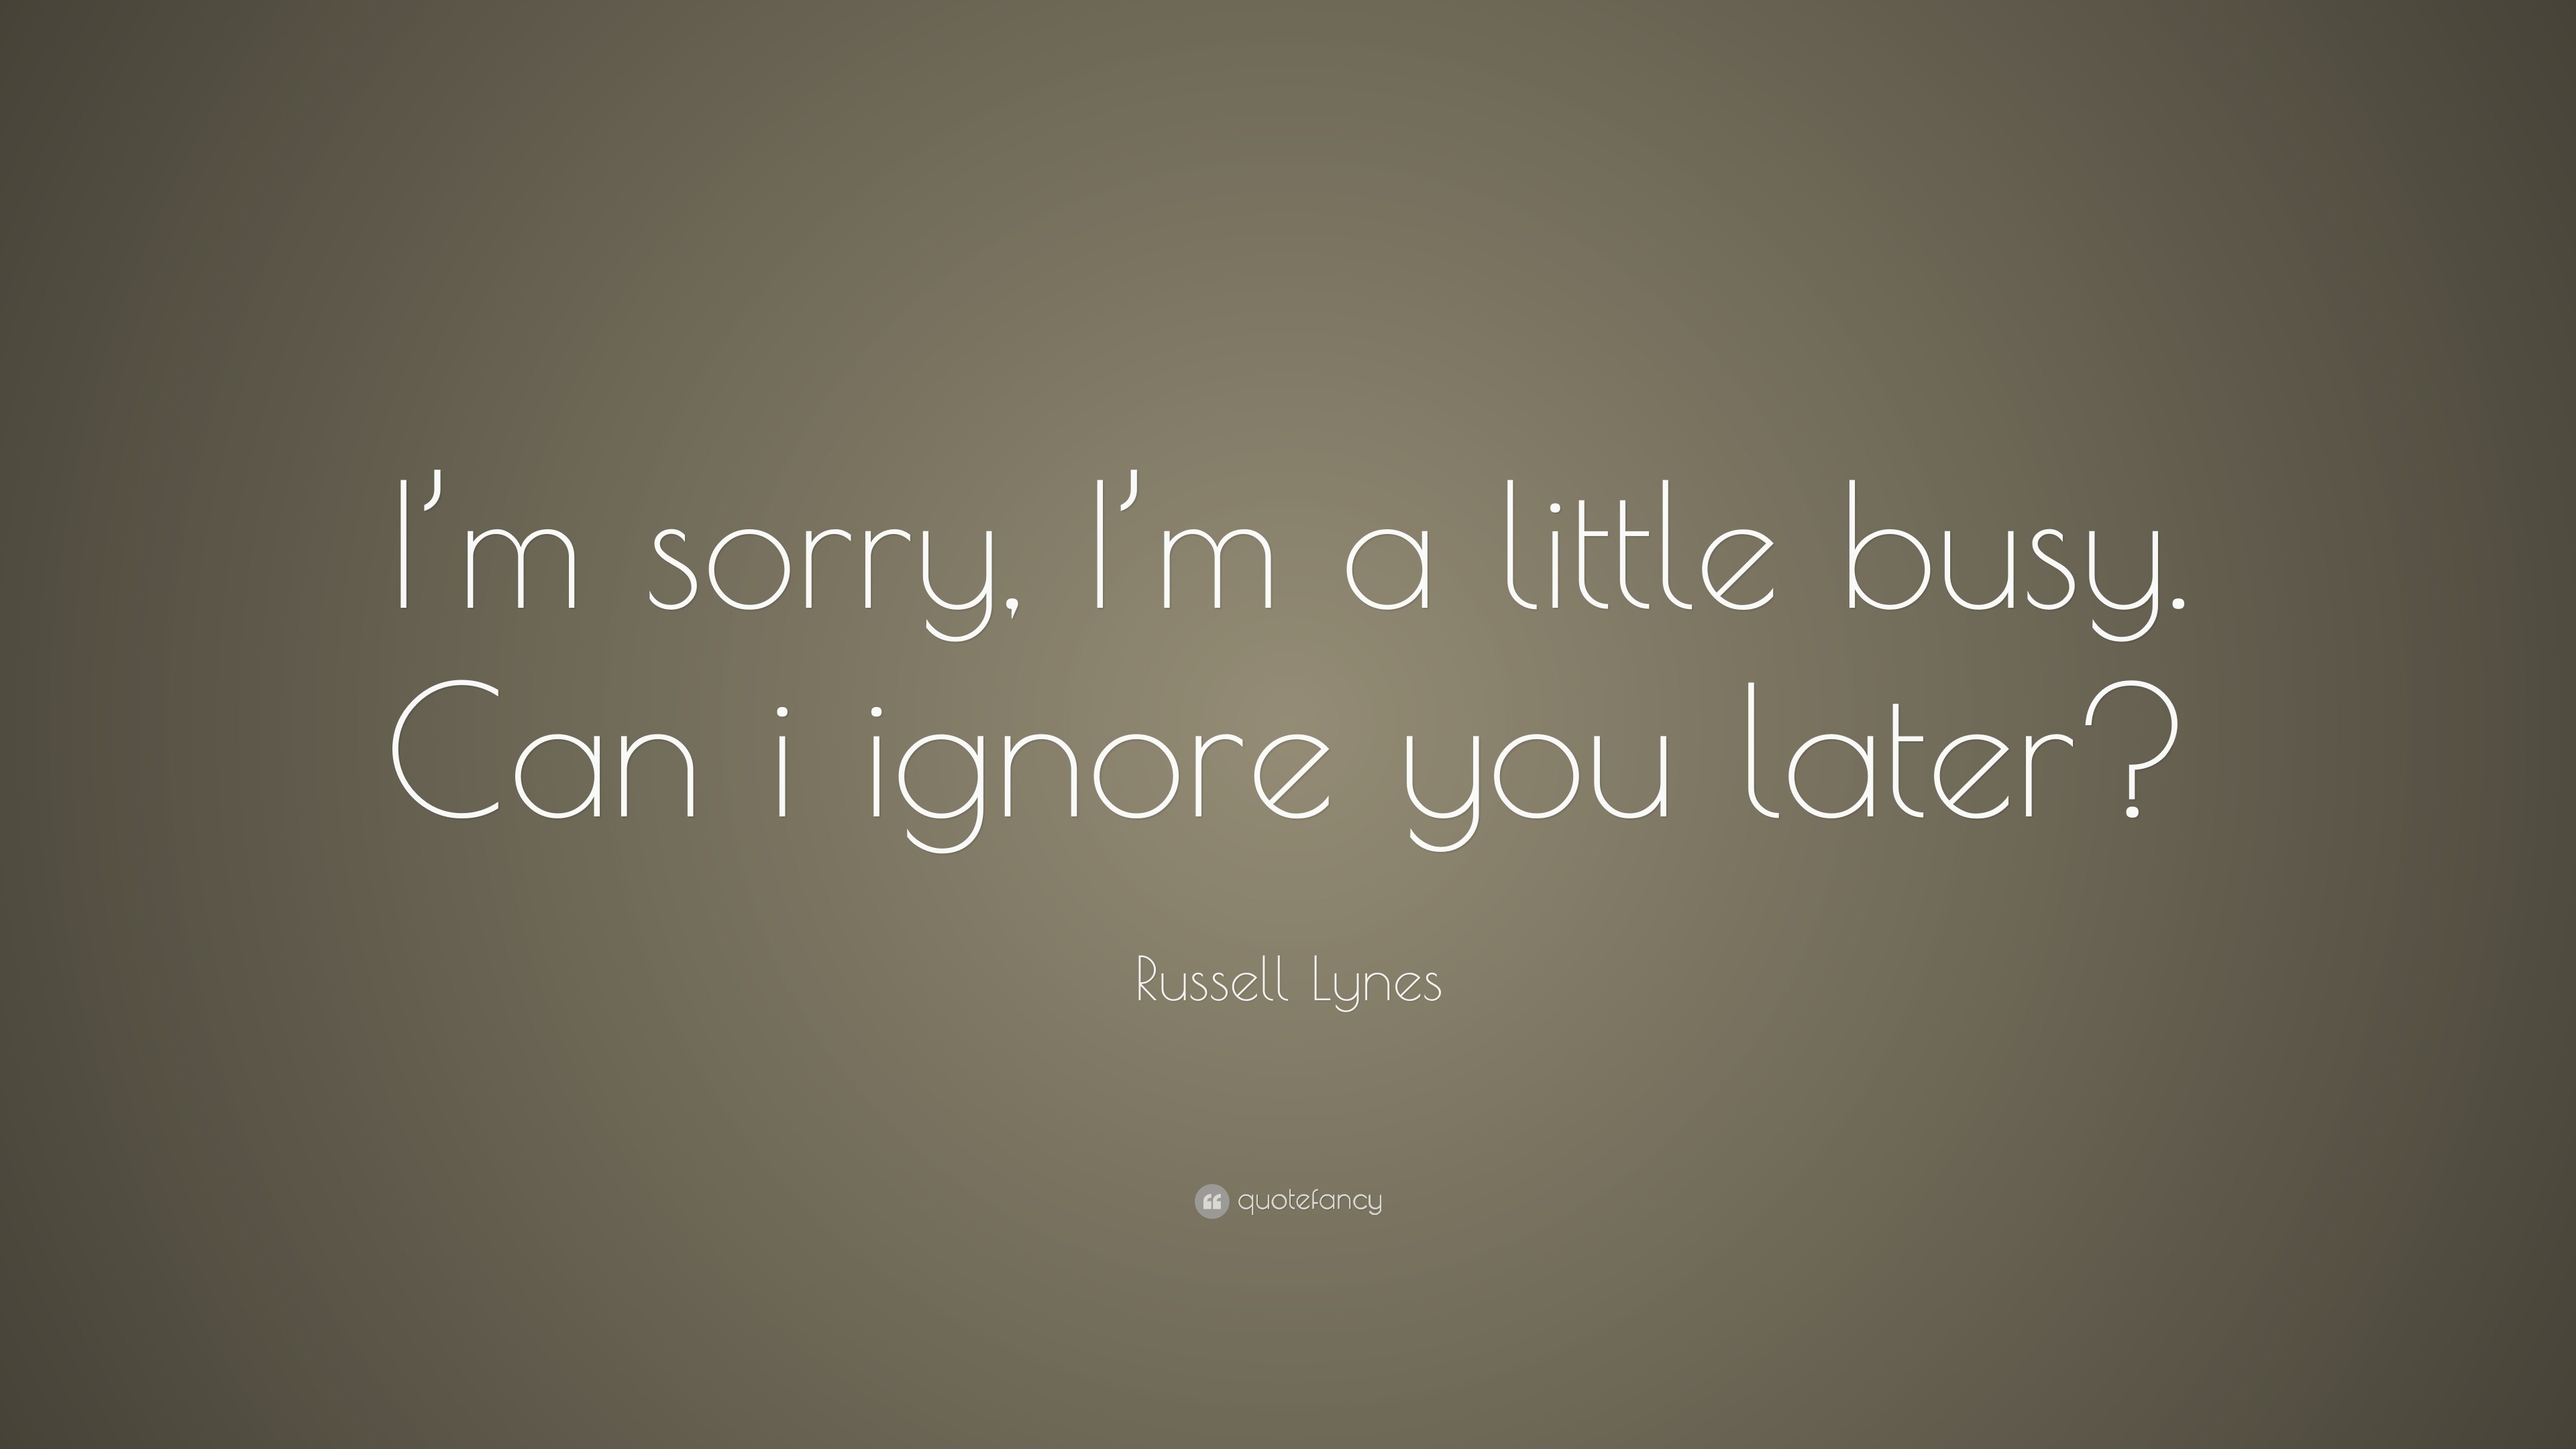 3840x2160 Russell Lynes Quote: “I'm sorry, I'm a little busy